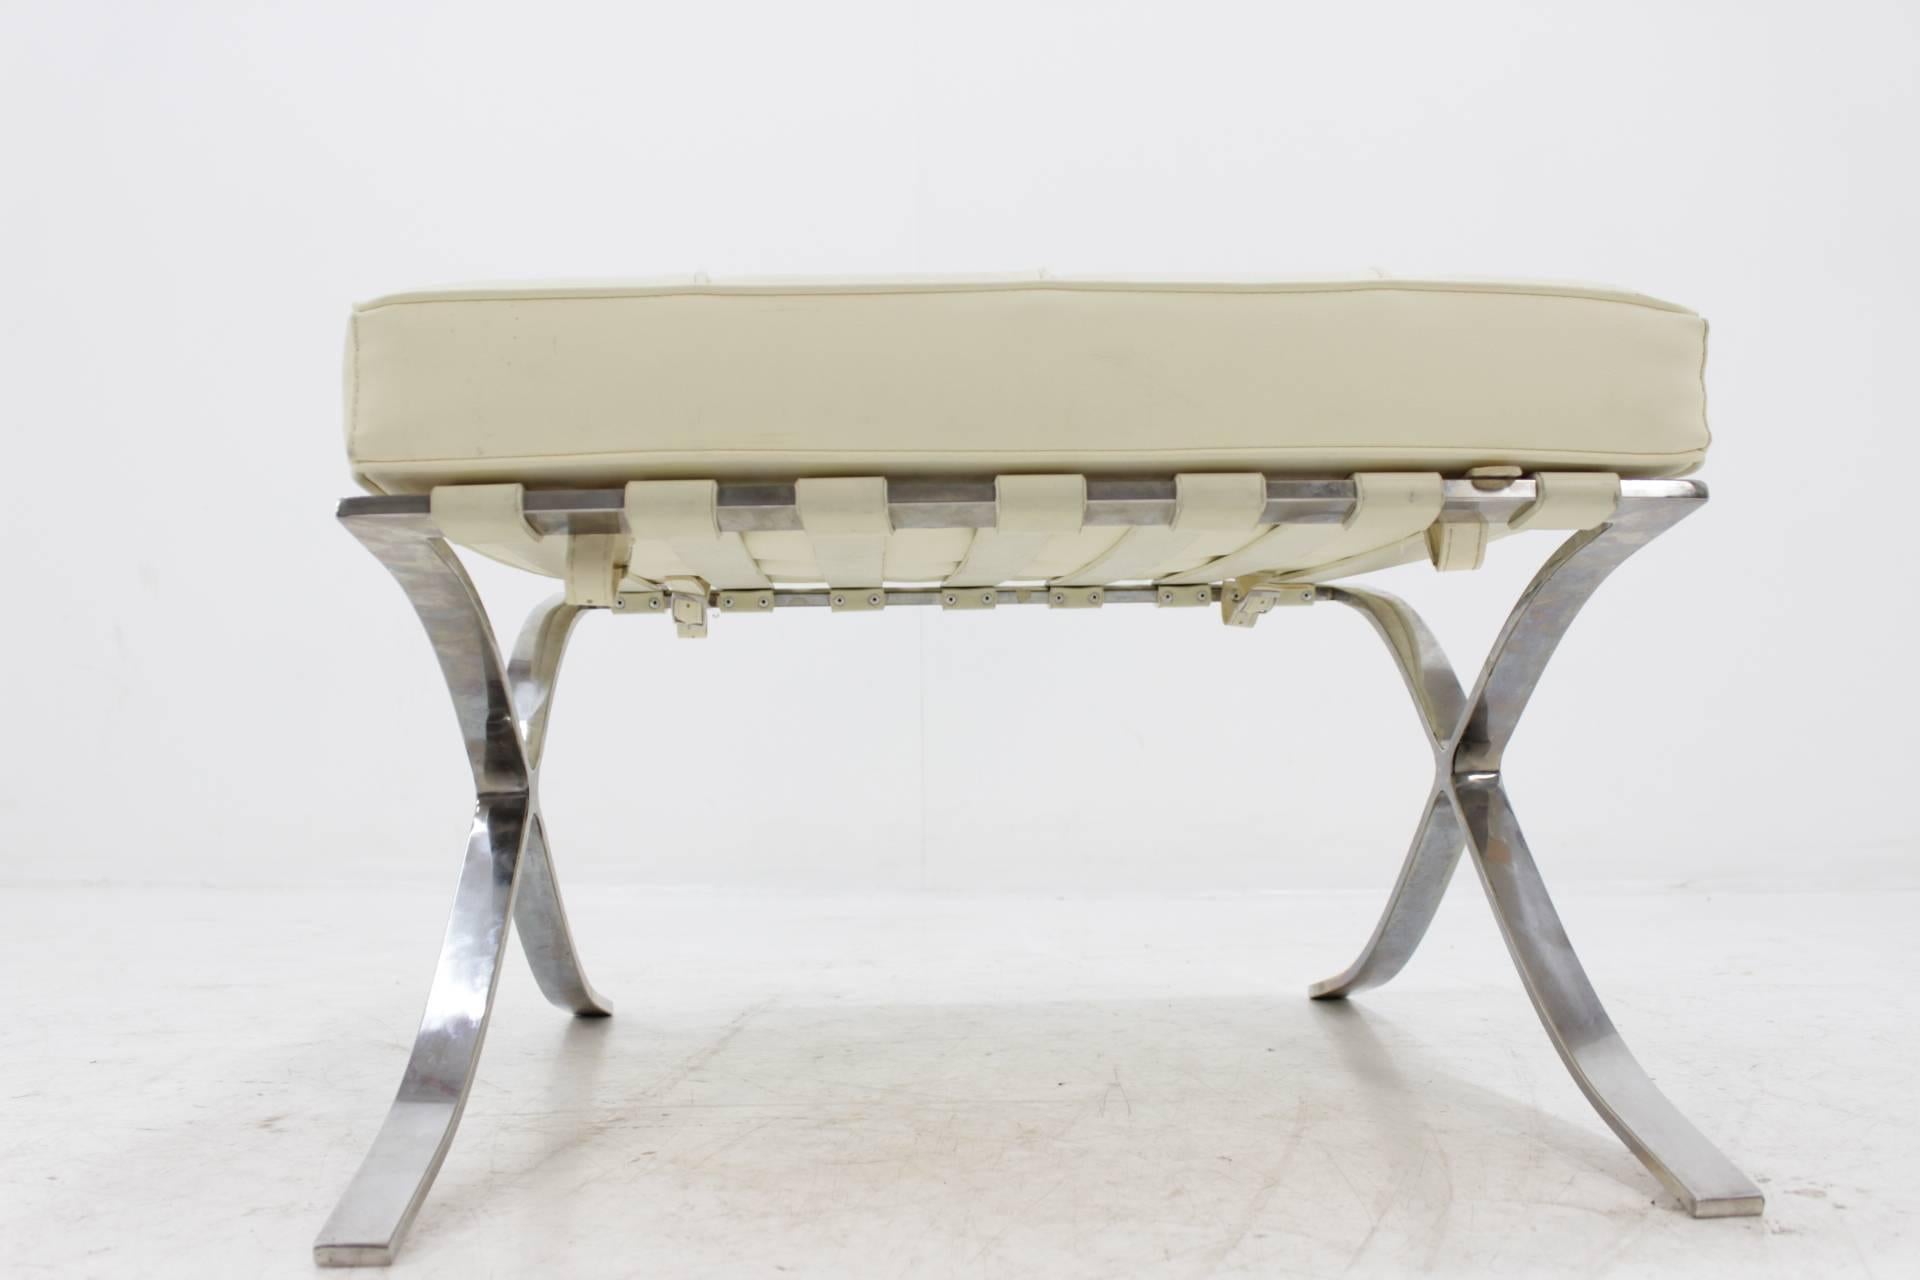 - Designer: Ludwig Mies van der Rohe
- Very good original condition 
- Chrome with patina
- 3 pieces available
- 1980-1990s.